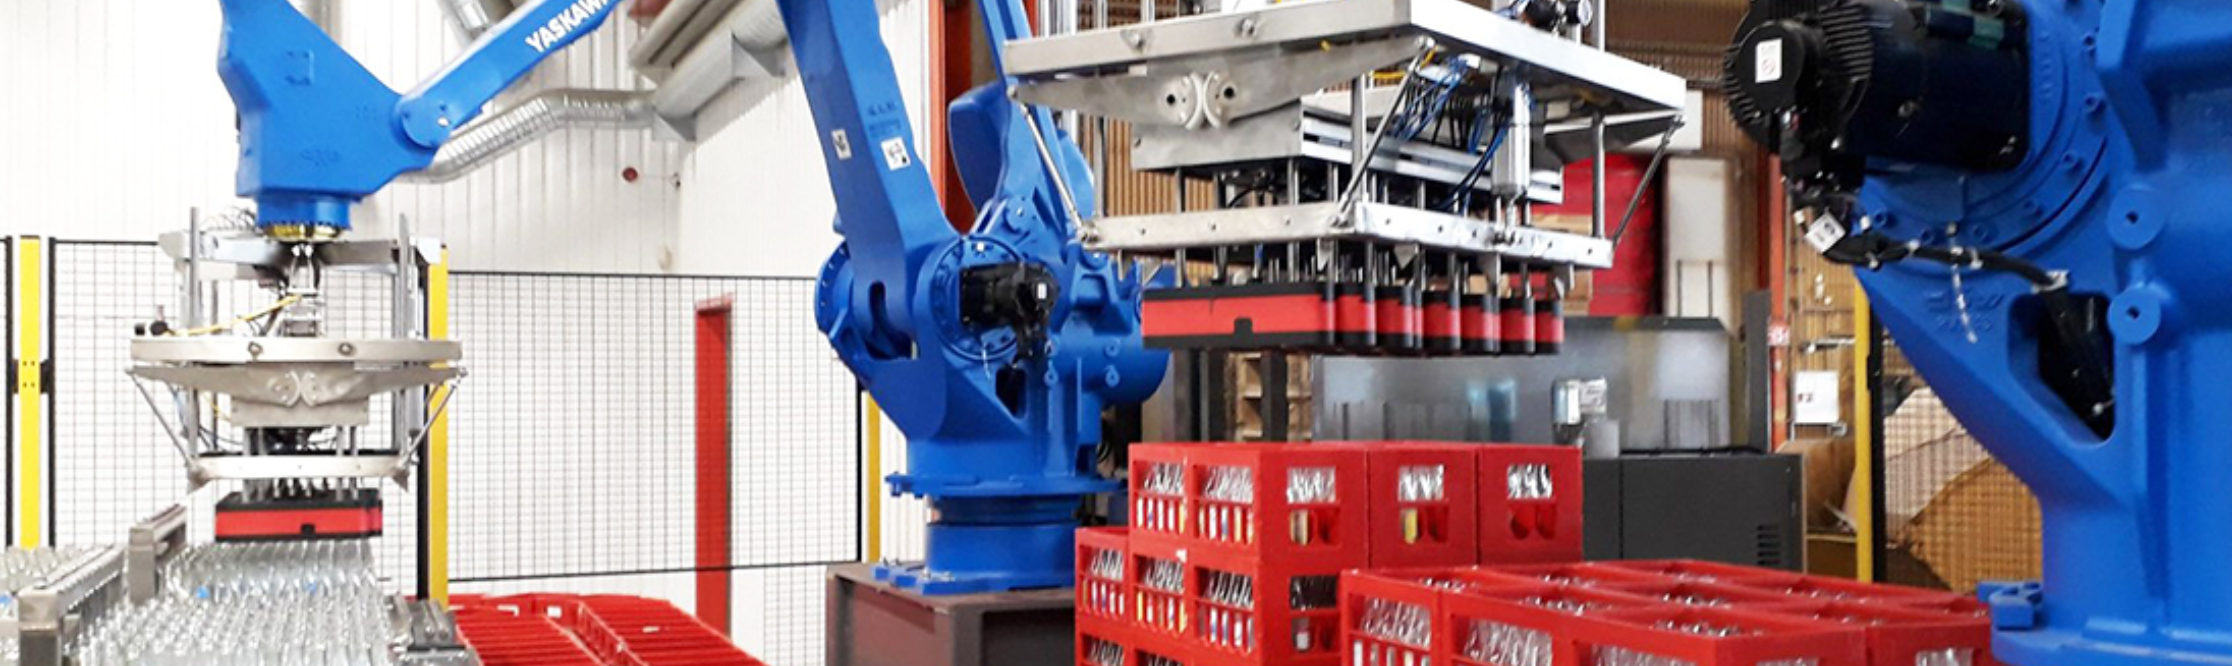 Yaskawa Robotic solutions bring greater productivity to the global plastic market